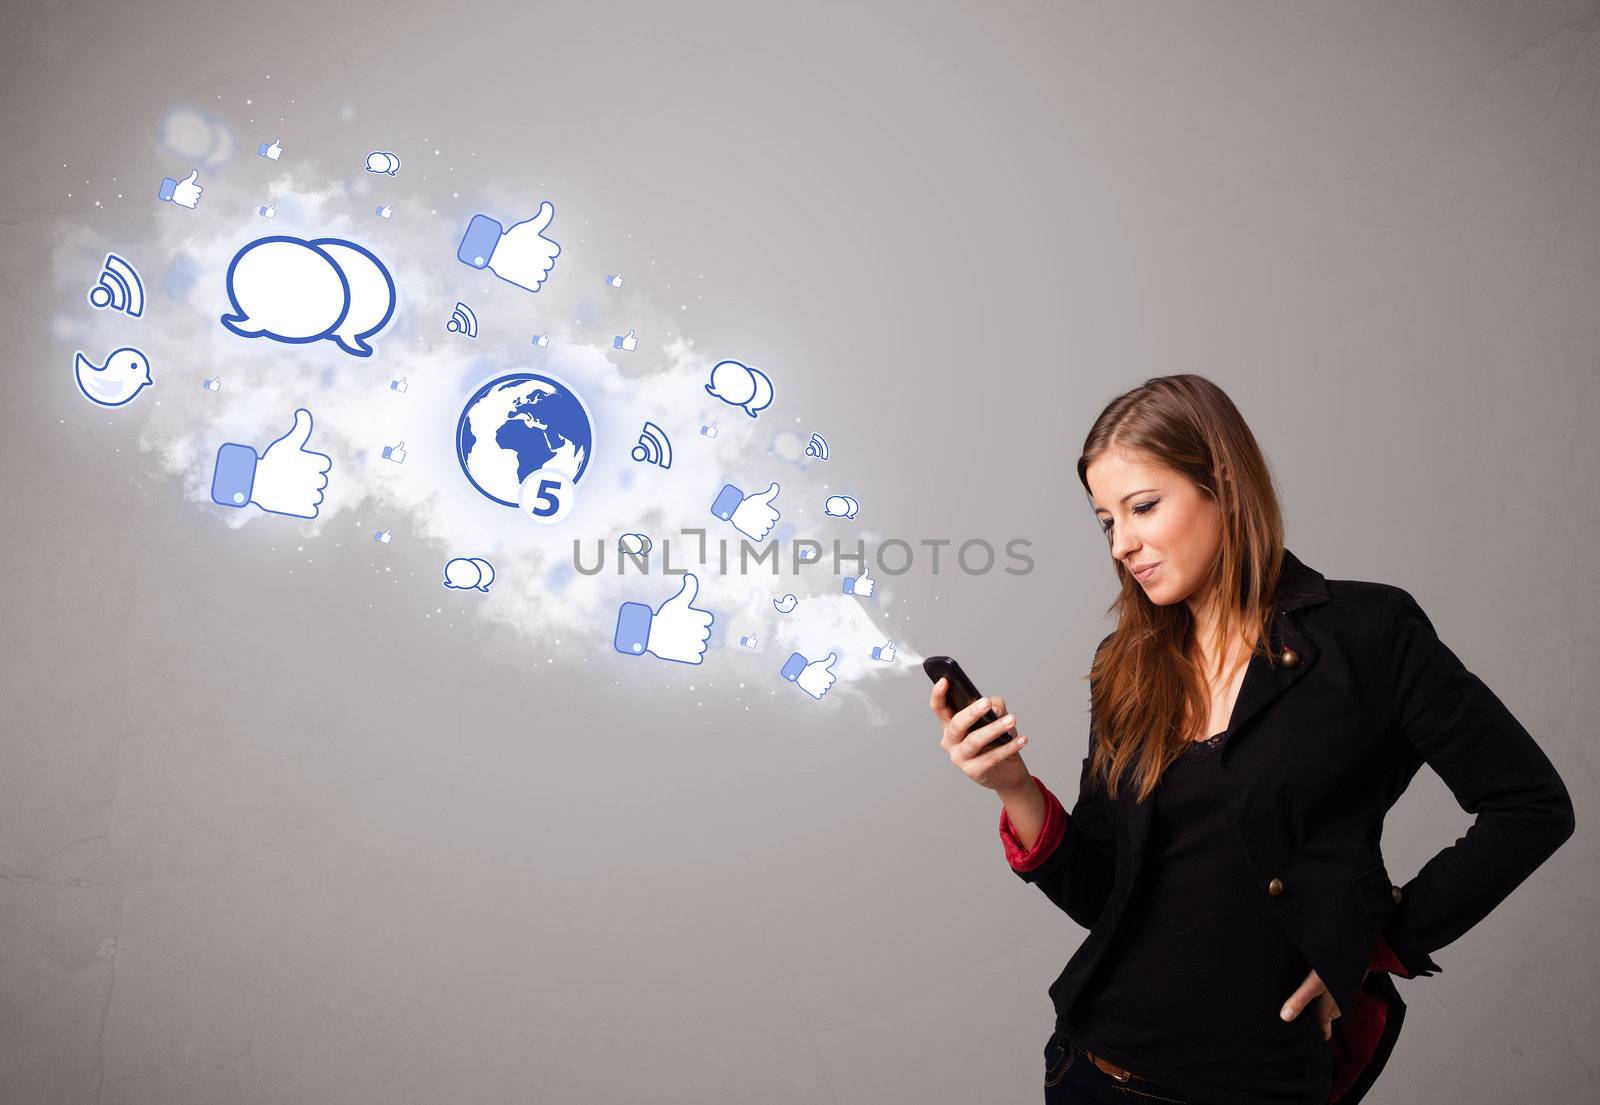 Pretty young girl holding a phone with social media icons in abstract cloud